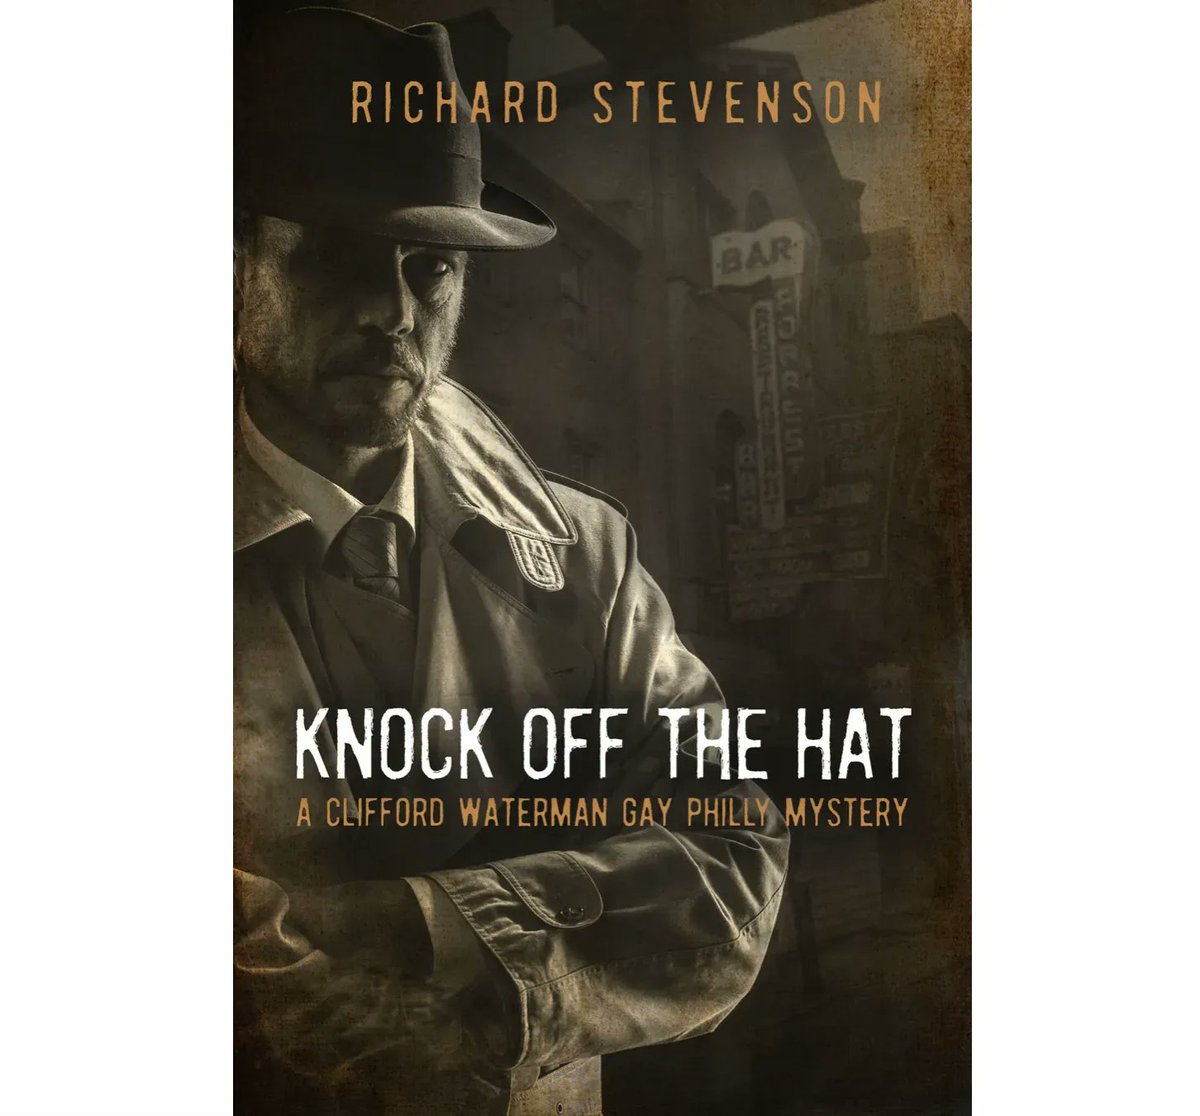 Richard Stevenson (Lipez) passed away last year, but he left us one last novel, Chasing Rembrandt. His Donald Strachey, PI mysteries, starting with Death Trick (in 1981) are not to be missed. buff.ly/43JAzHy  #pridereads #pride